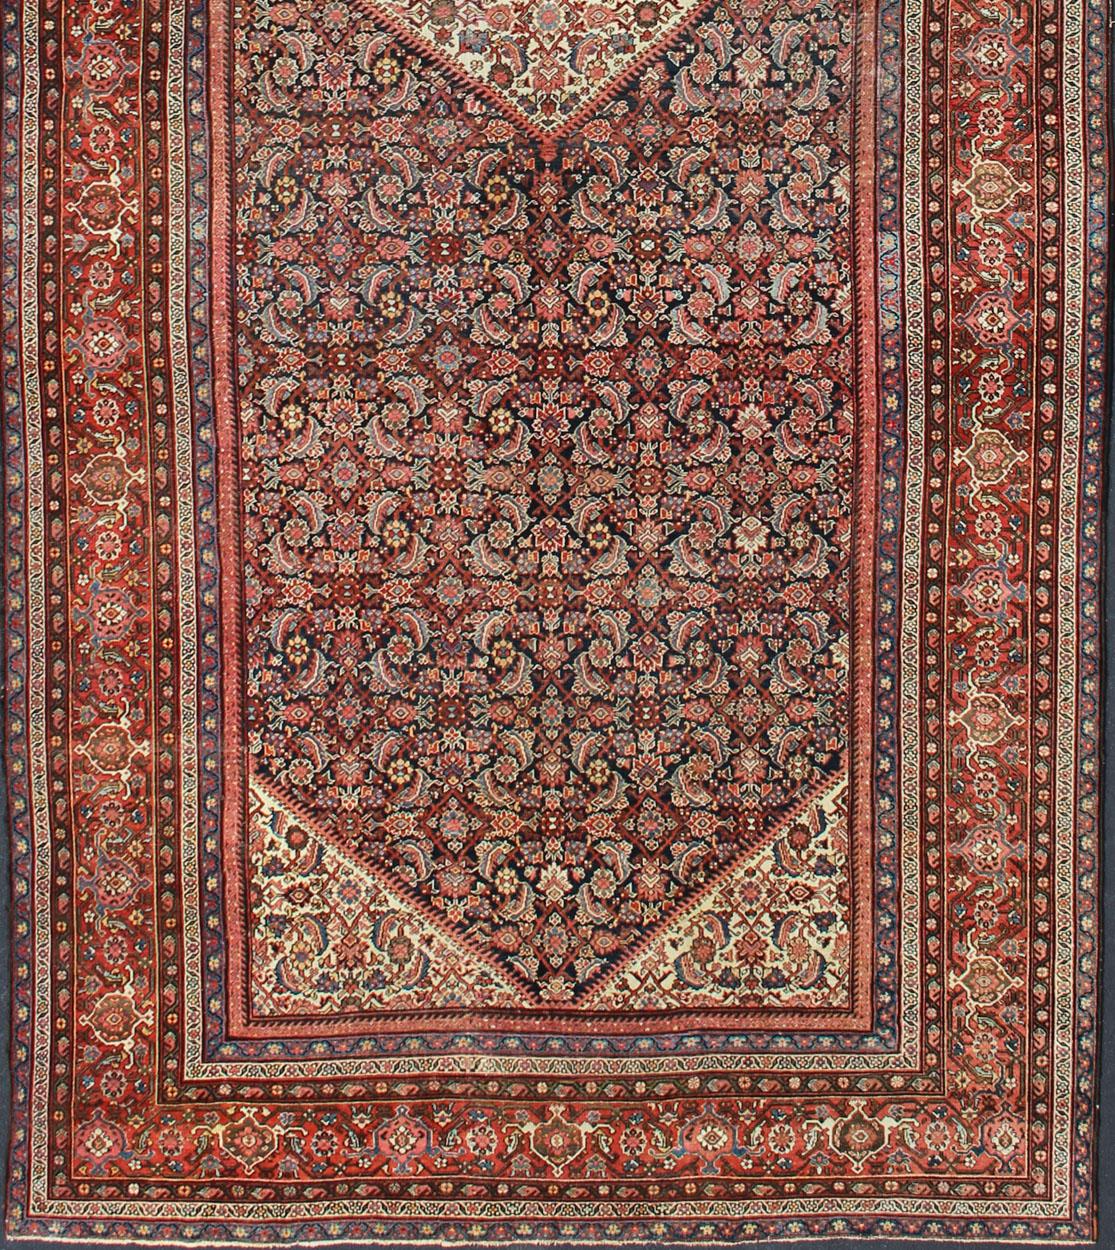 Hand-Knotted Very Long Persian Sultanabad Rug with Herati Design in Dark Blue and Red